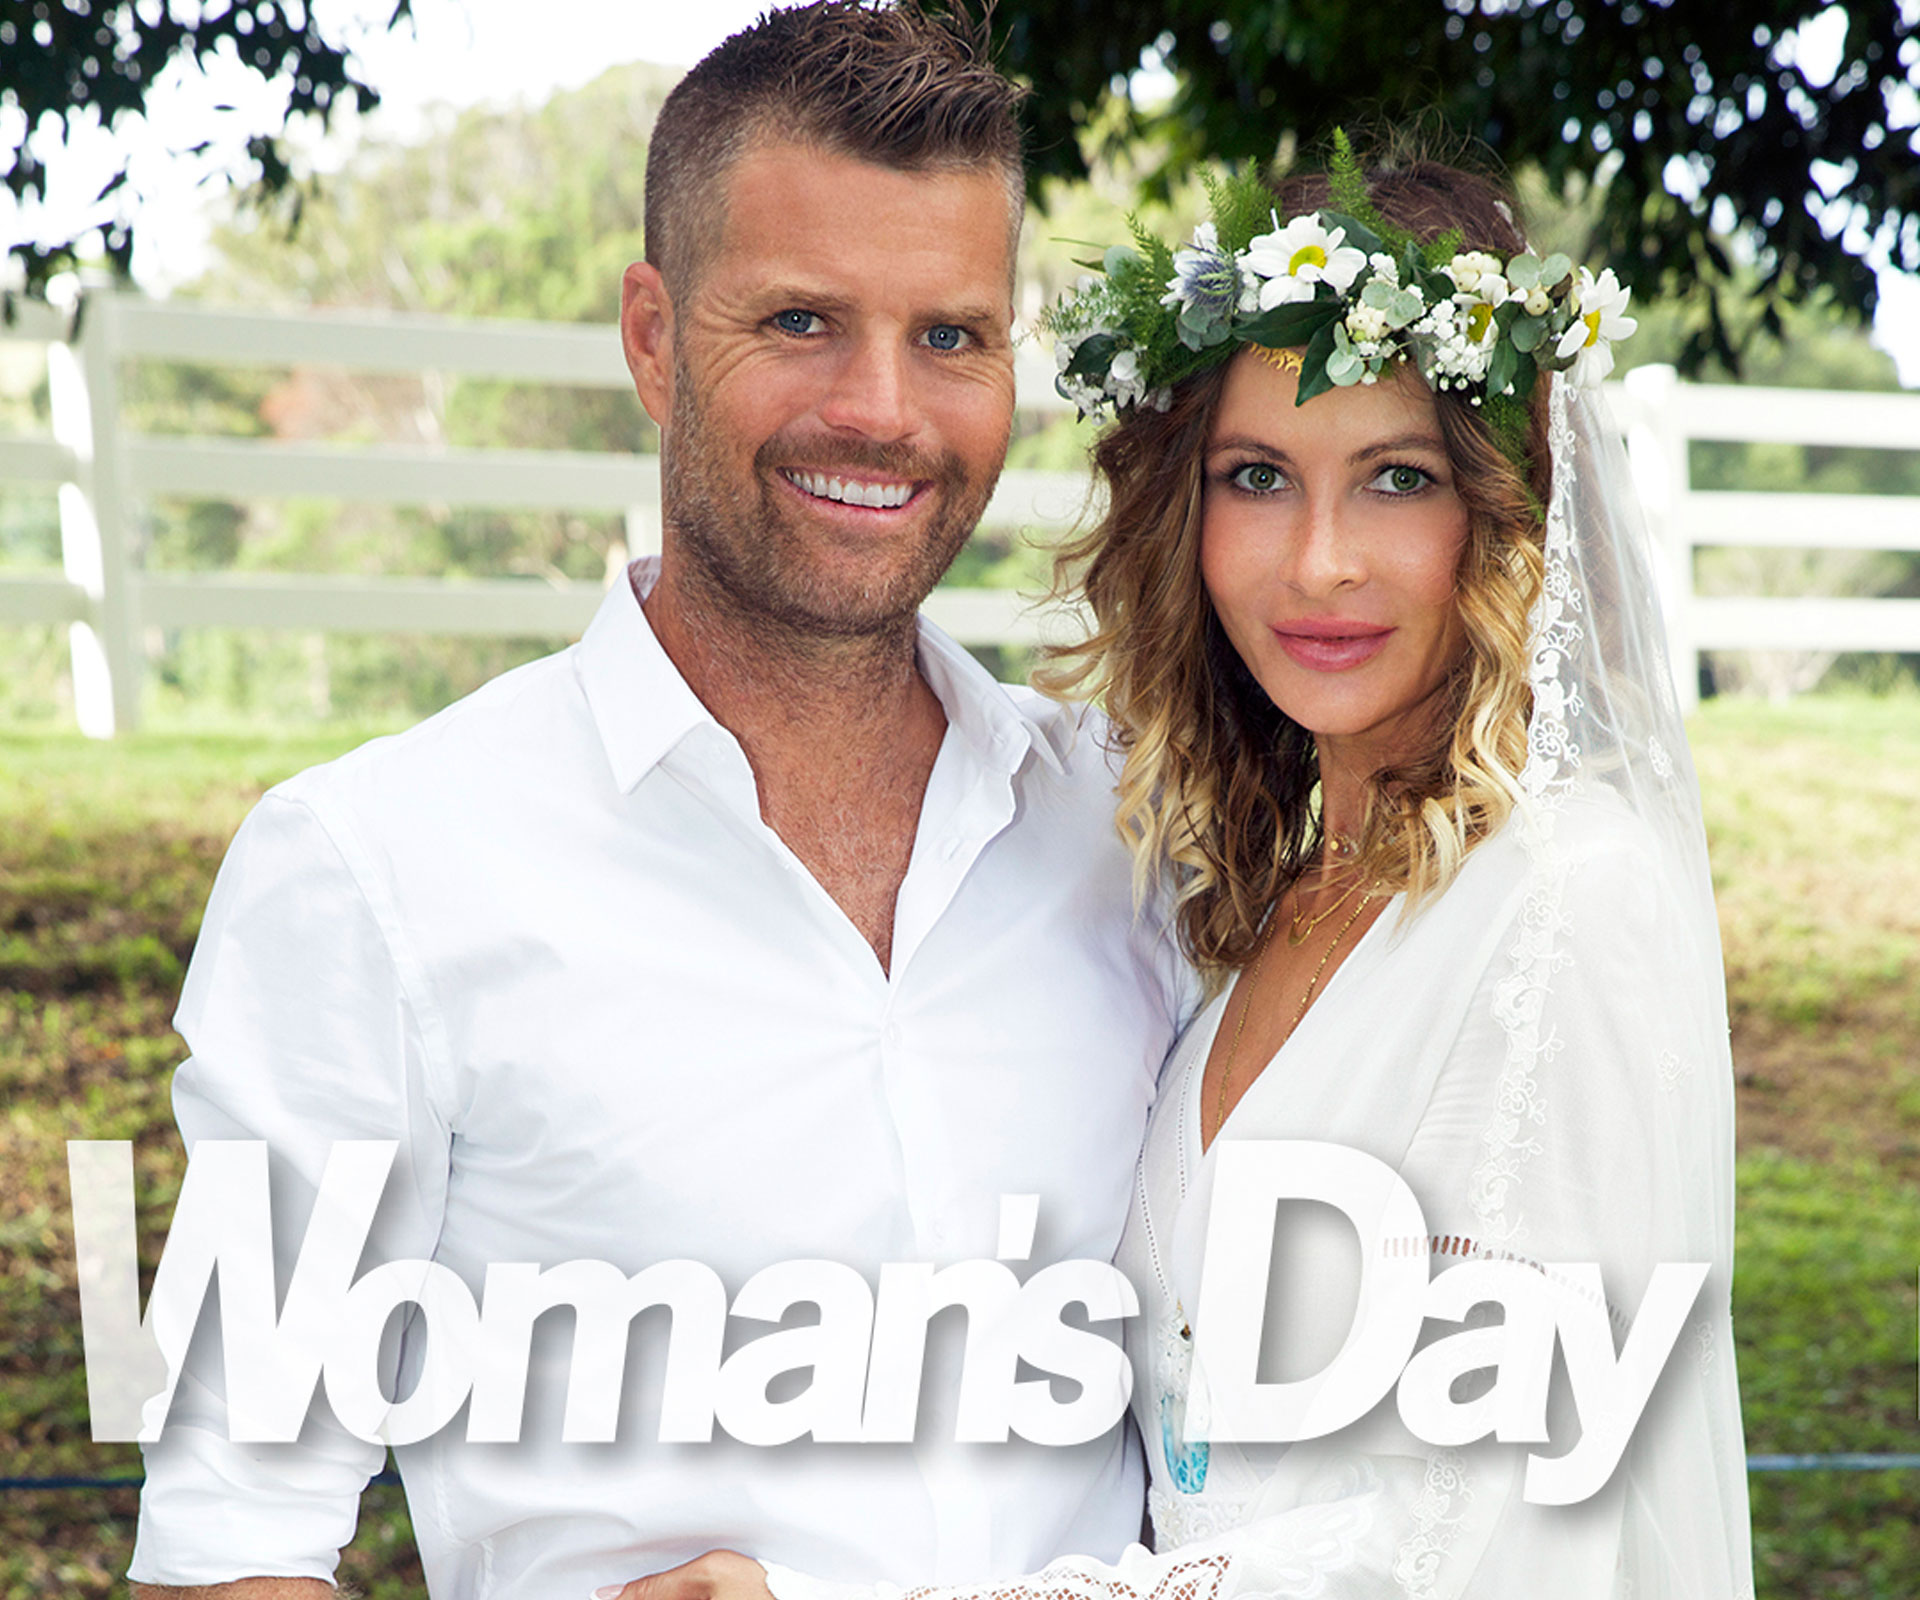 Nicola Robinson and Pete Evans tie the knot